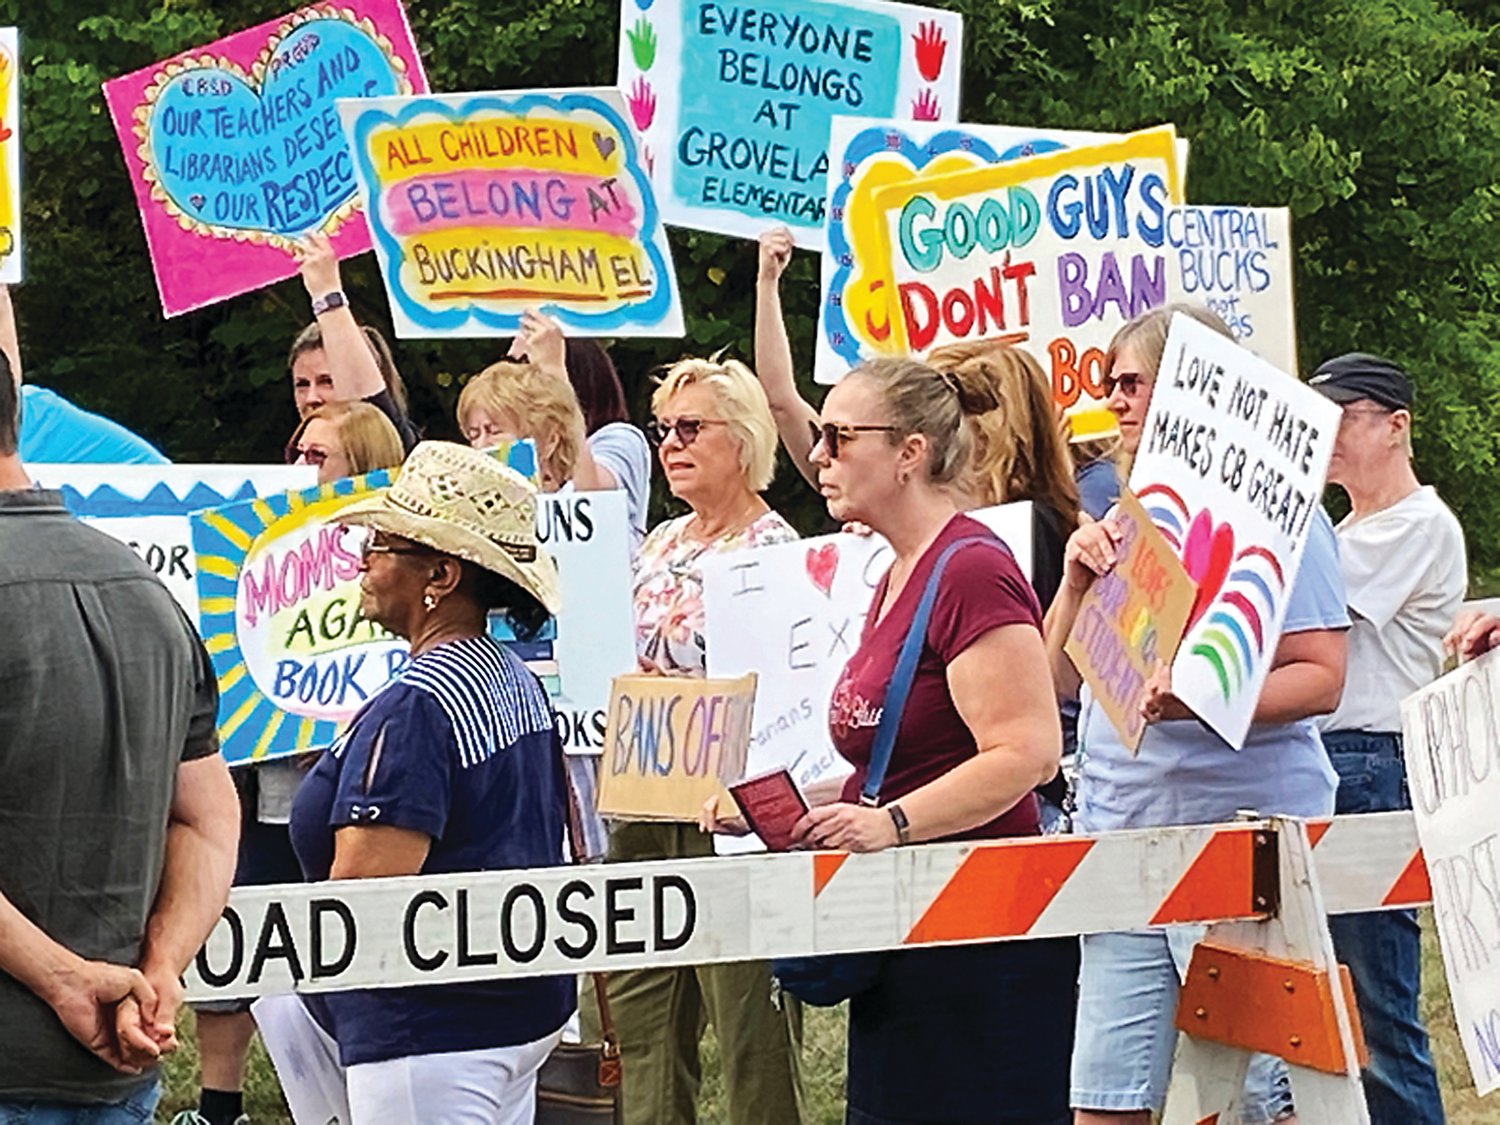 People gather before a Central Bucks School District meeting to protest a library policy they describe as nothing less than a book ban. The policy, which would put the power to remove books from the school library shelves in the hands of “superintendent’s appointees” was approved in a 6-3 vote.